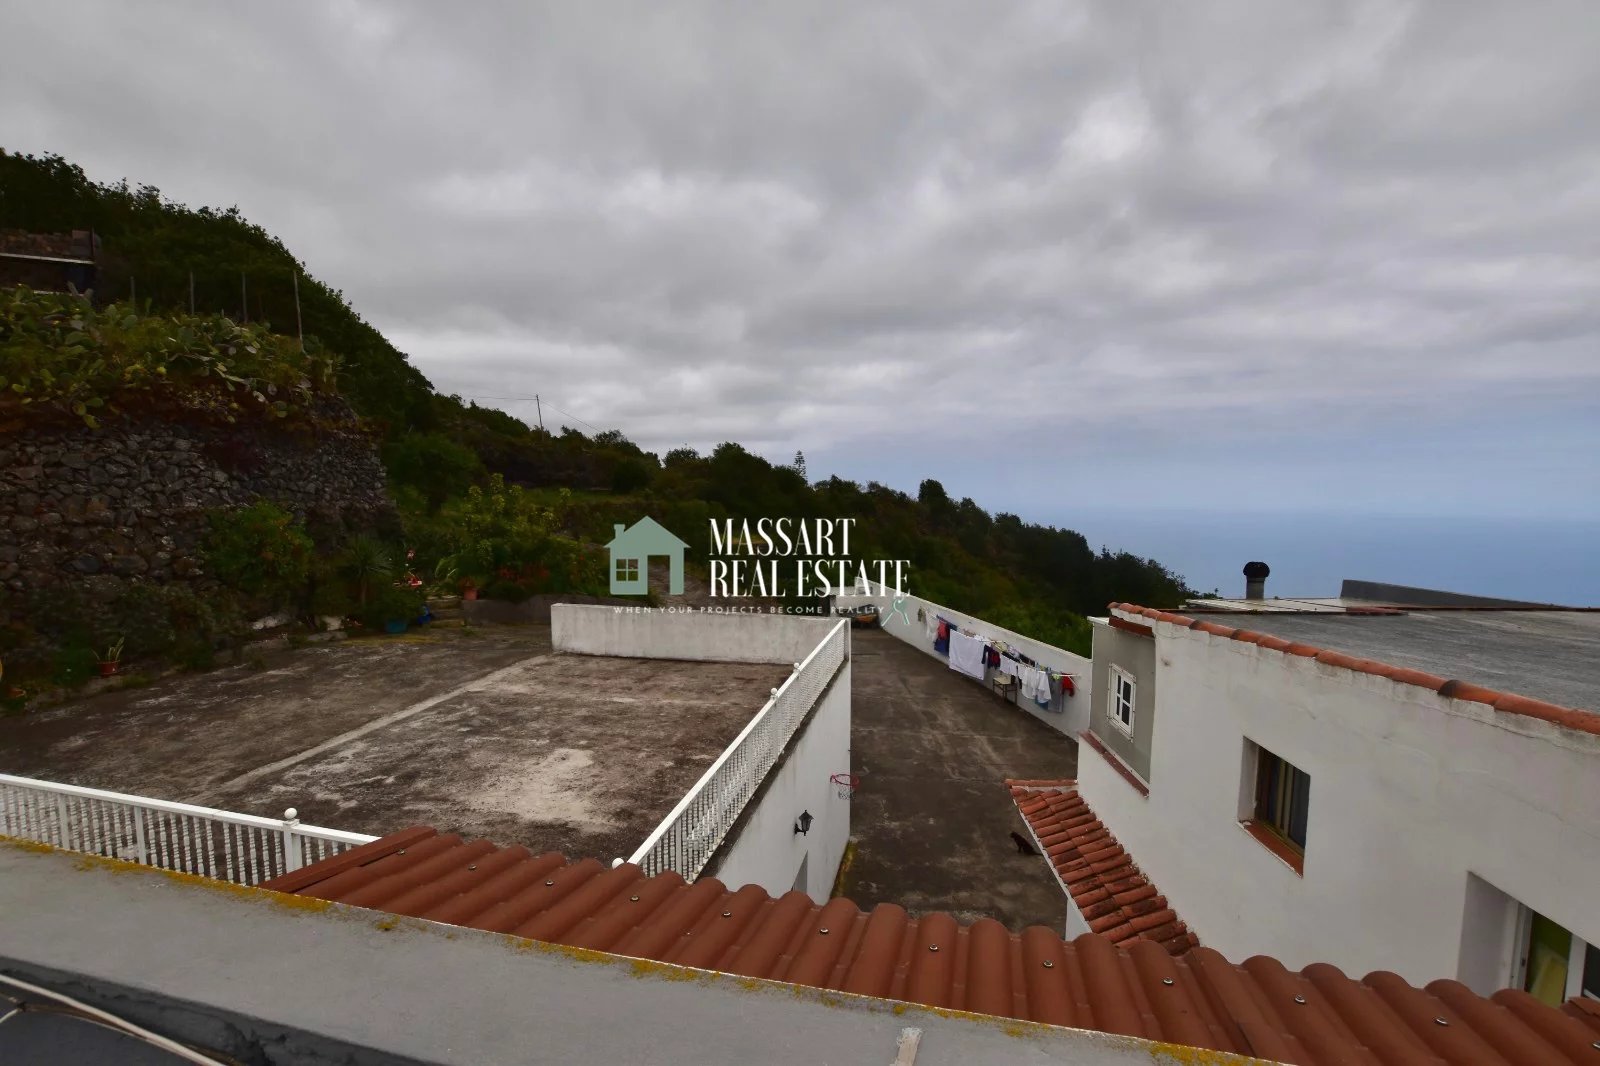 House located in the town of La Vega (Icod) with privileged views of the sea.